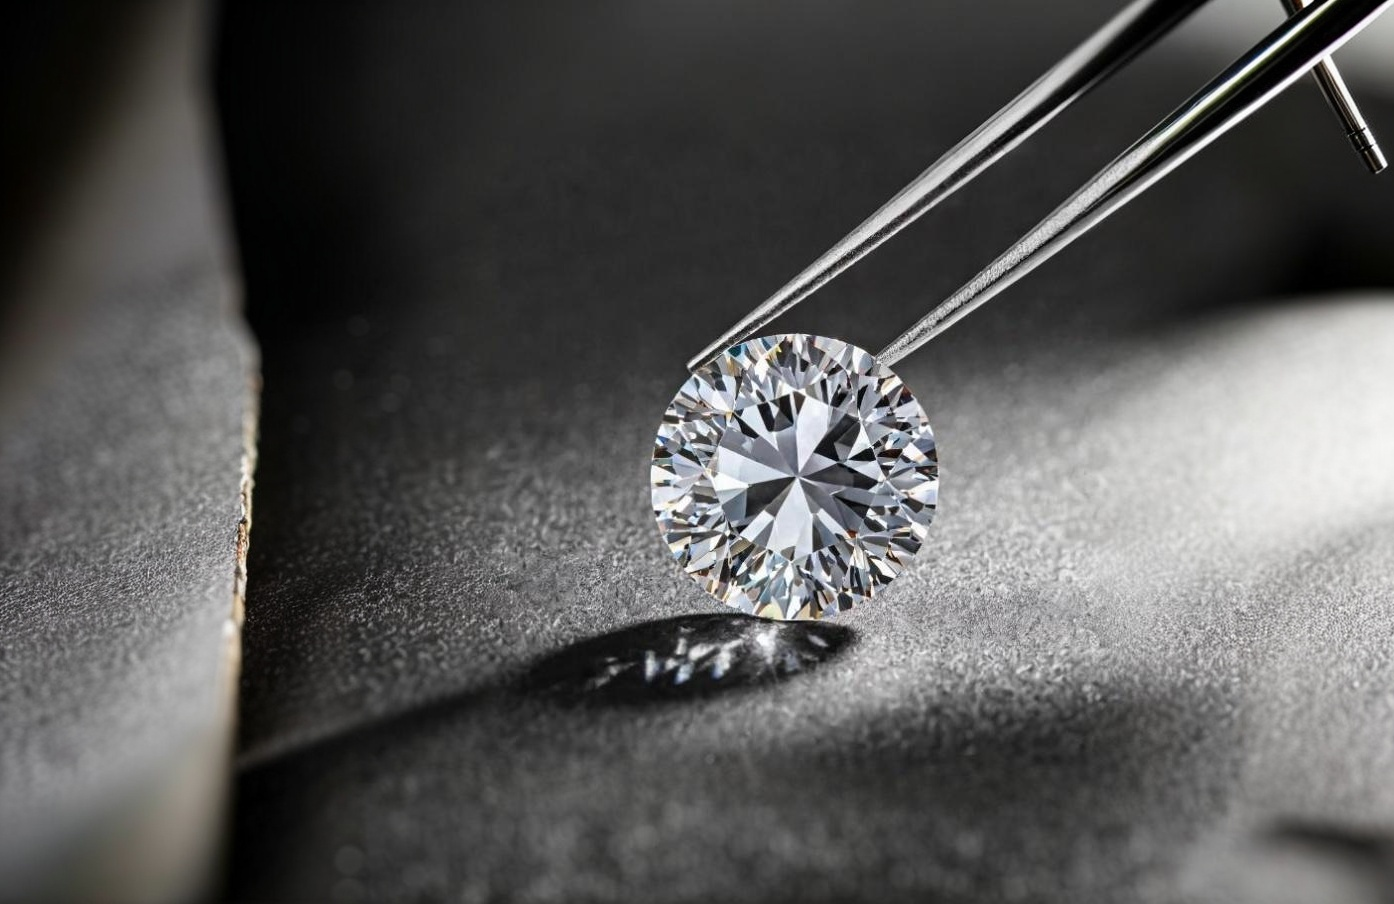 Dsons Impex: Your Top Choice for Lab-Grown Diamonds